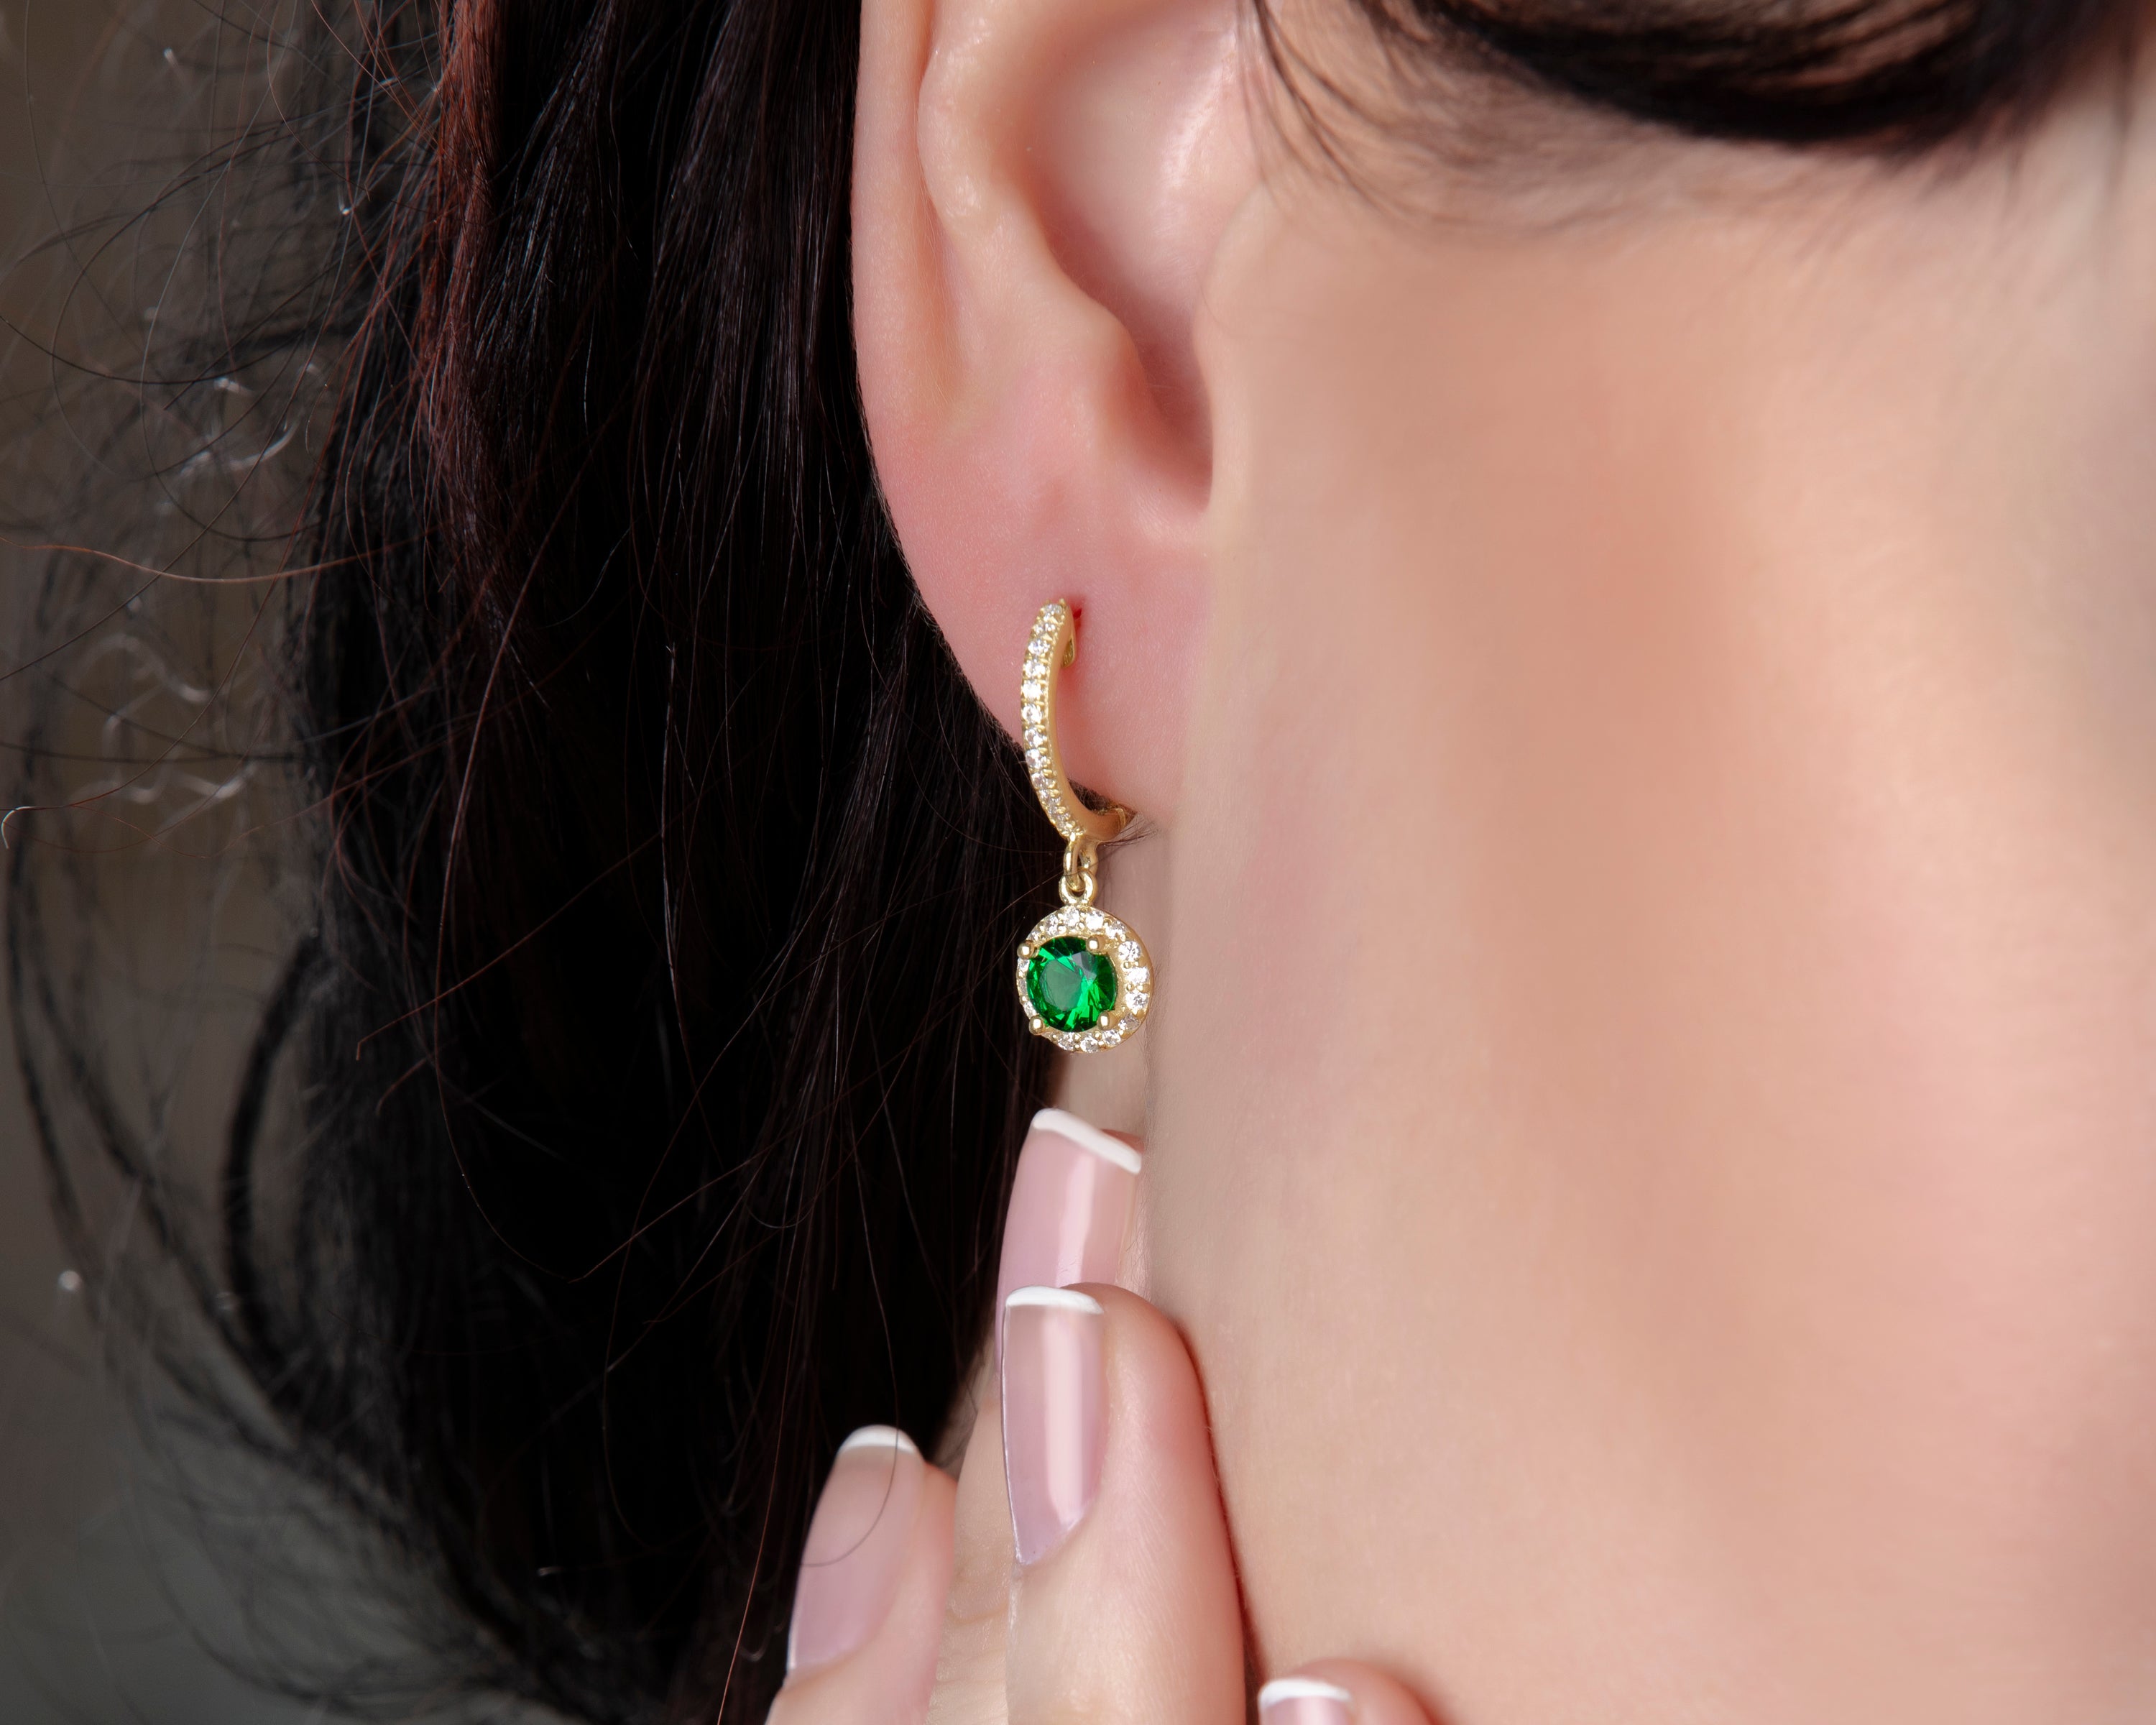 The Orchid Gold Plated Earring in Emerald Green